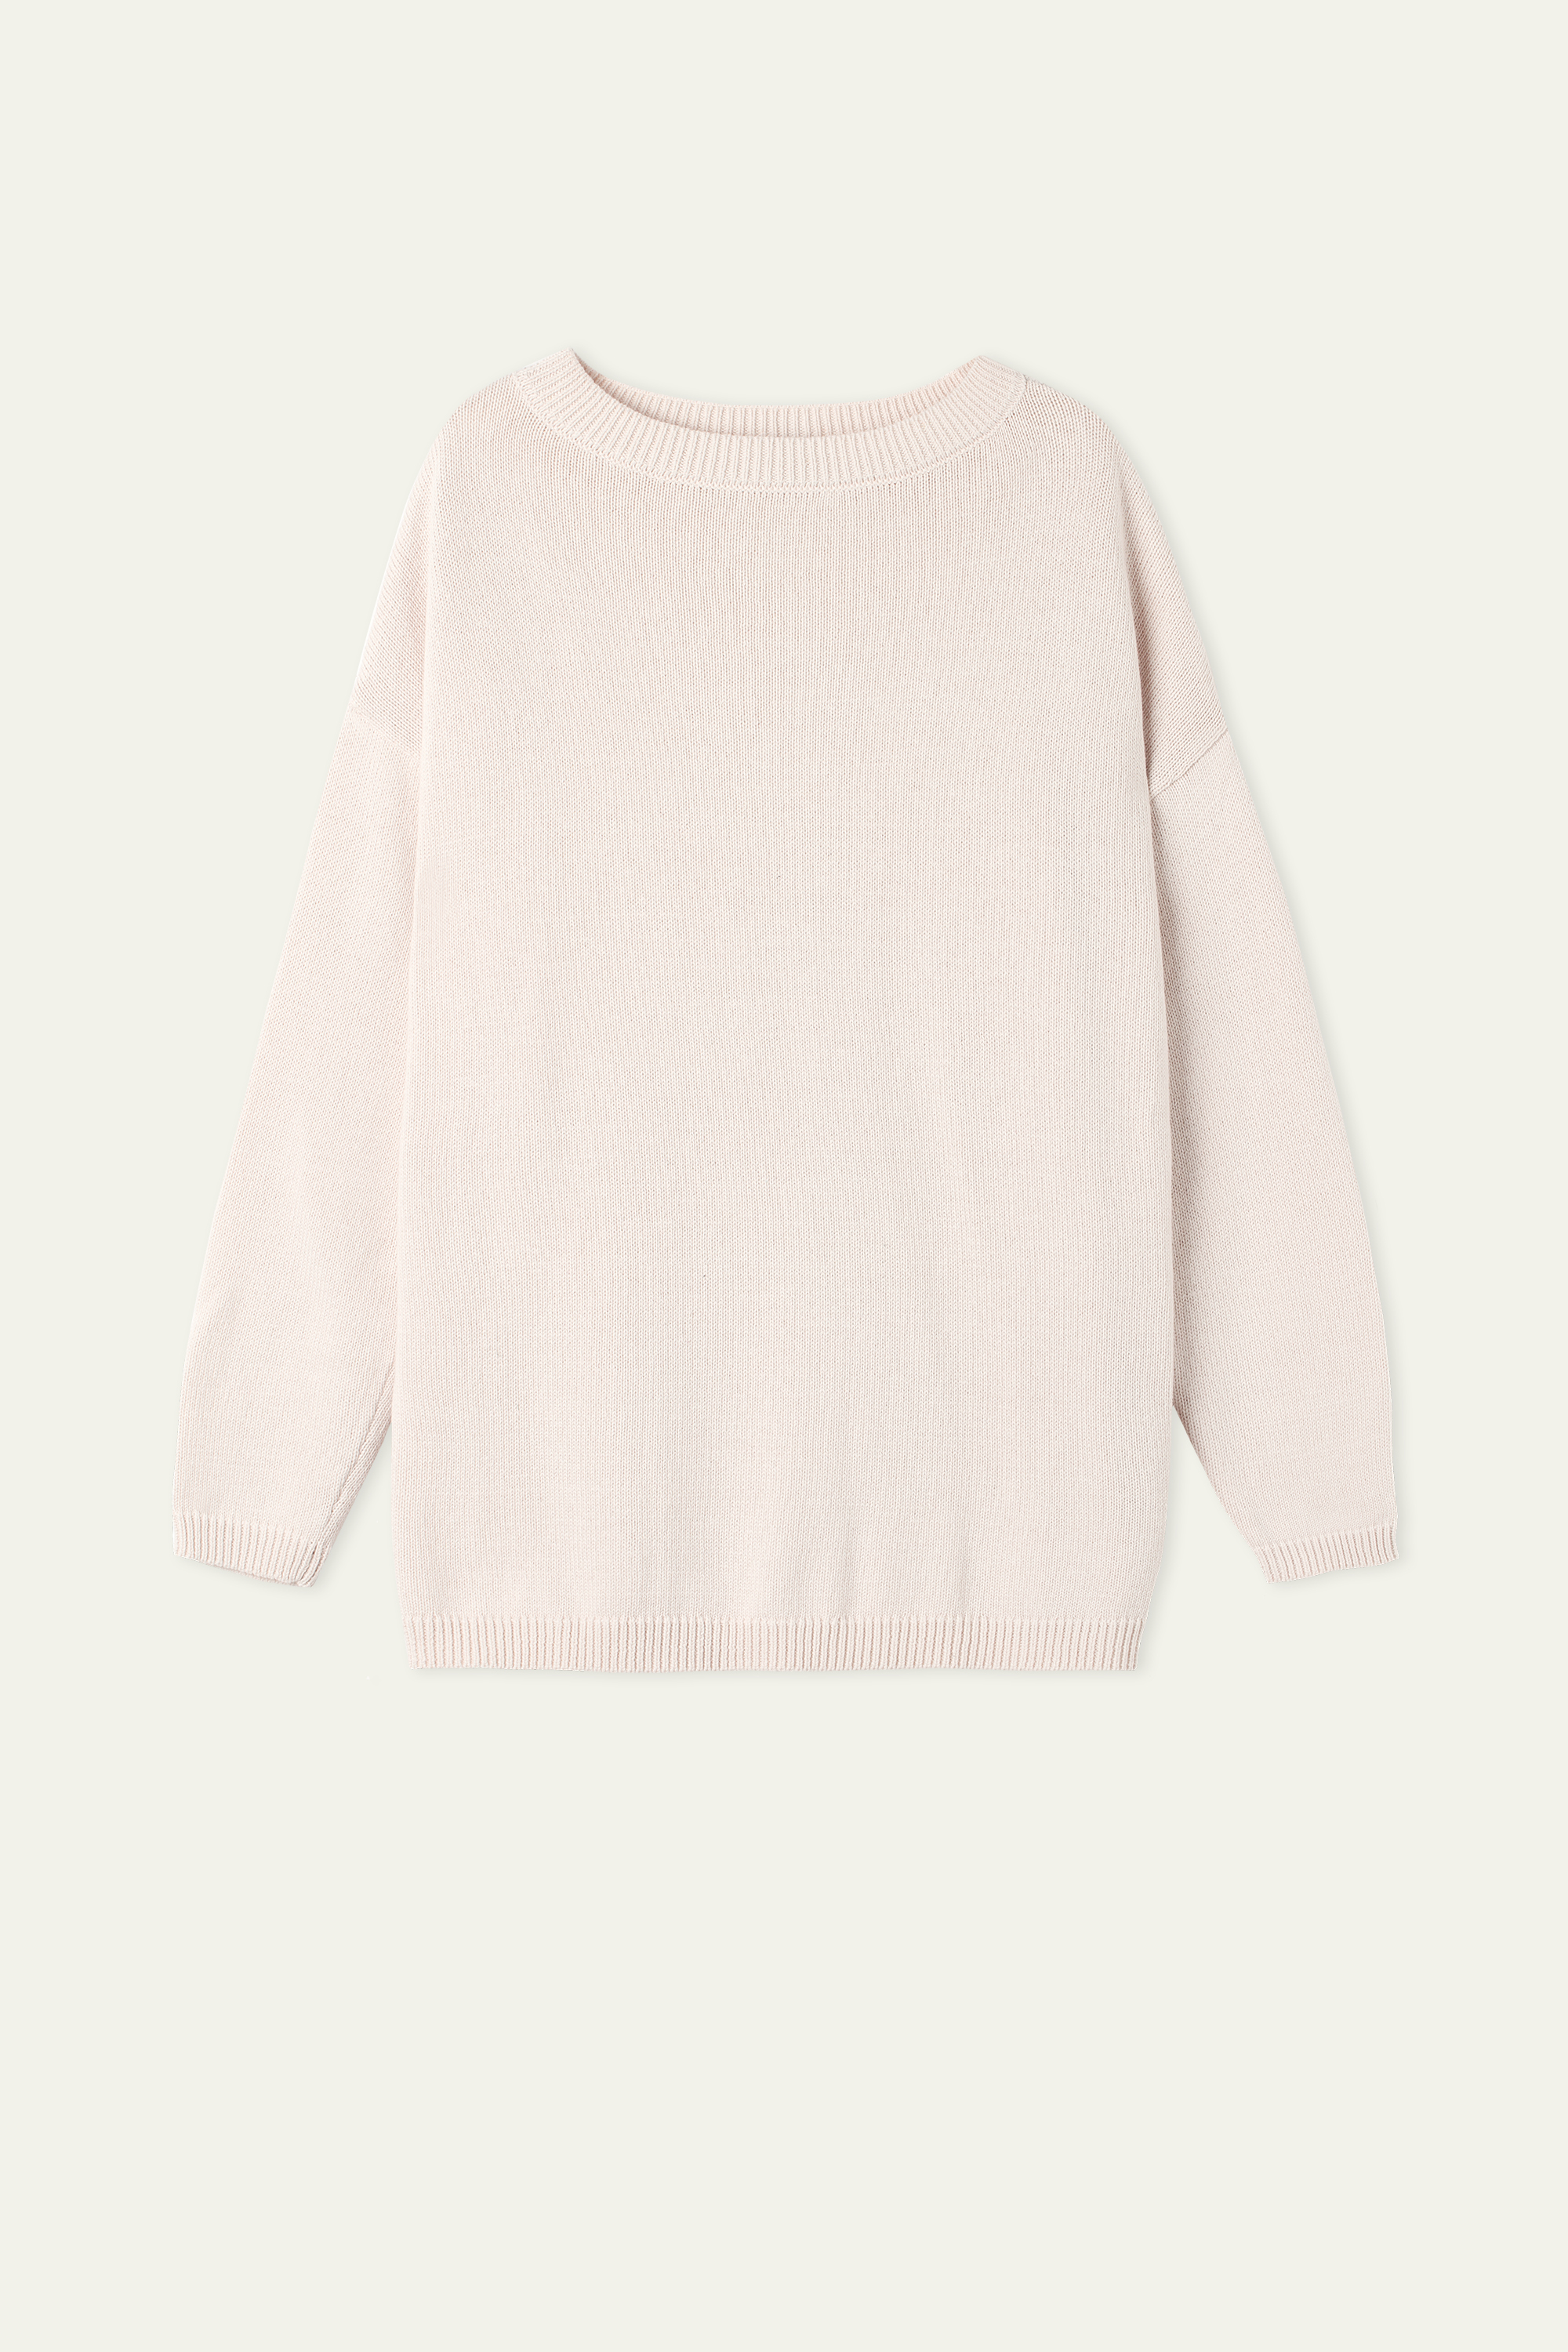 Long Boat Neck Sweater in Fully-Fashioned Cotton